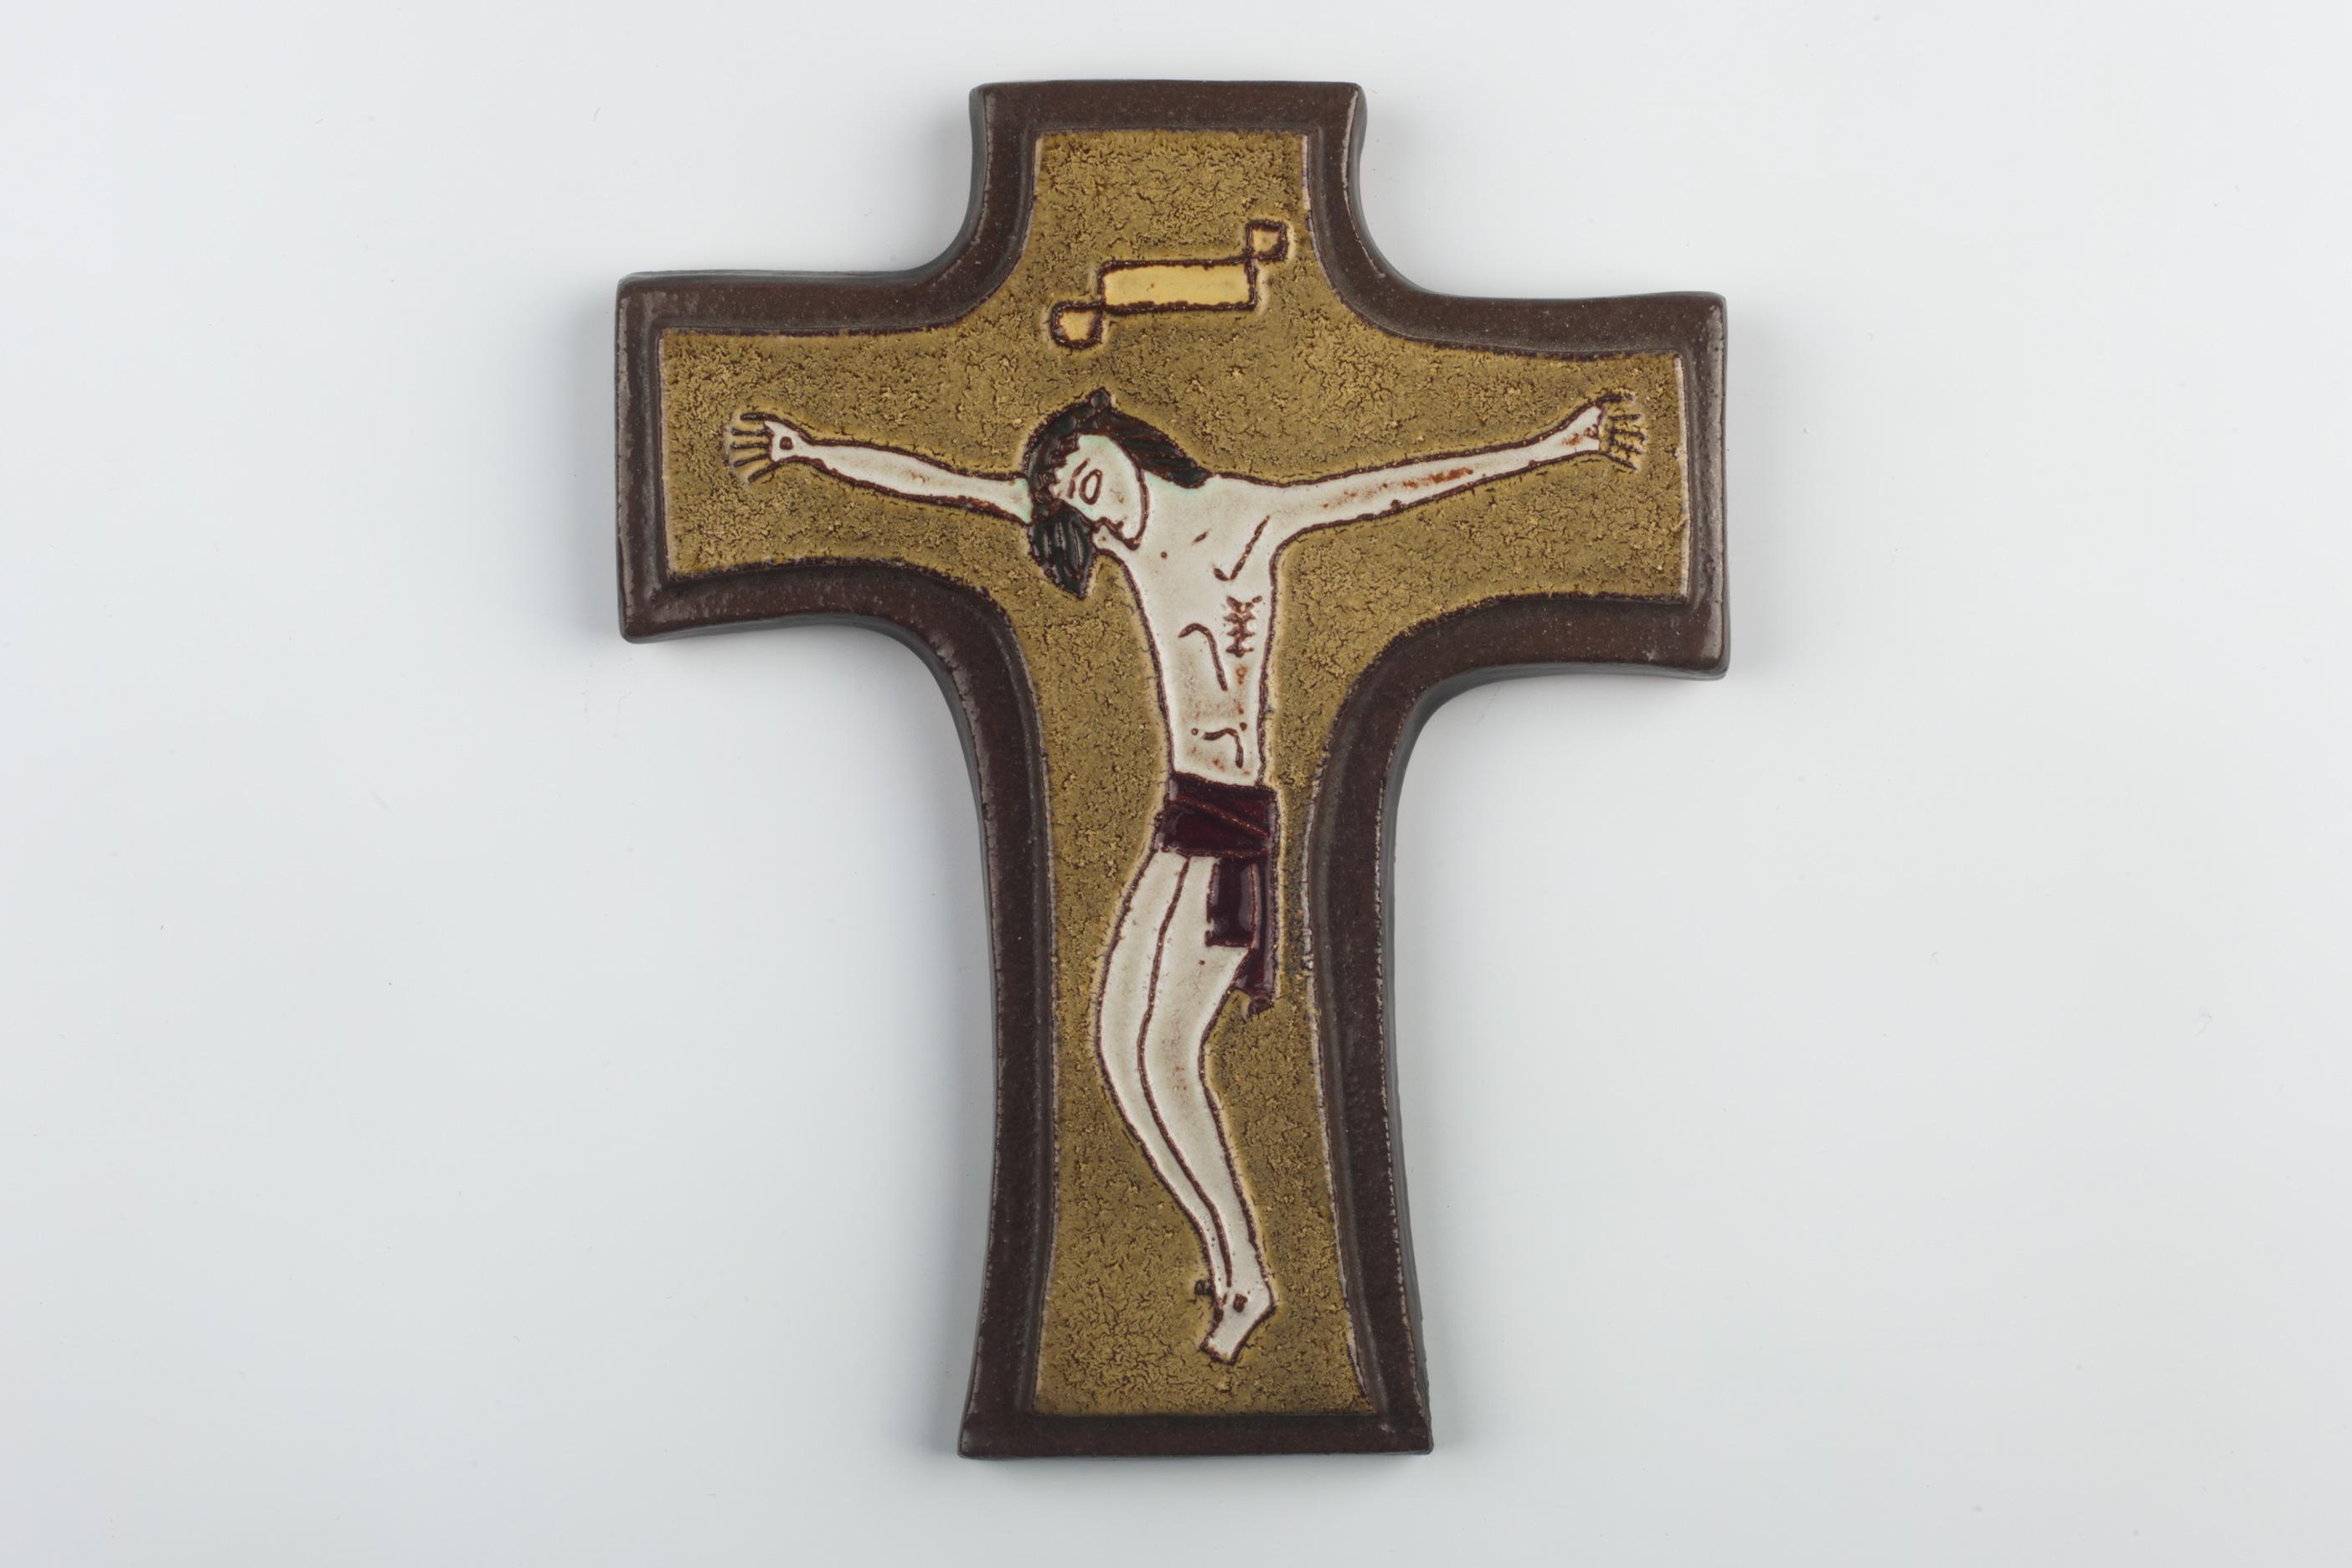 Mid-century European crucifix in ceramic, made in the 1960s. Delicate Christ embossed over light and dark brown cross. Very 1920s art deco drawing style.

Dimensions

6 in. H x 4.75 in. W x 0.5 in. D

15 cm H x 12 cm W x 1 cm D

This piece